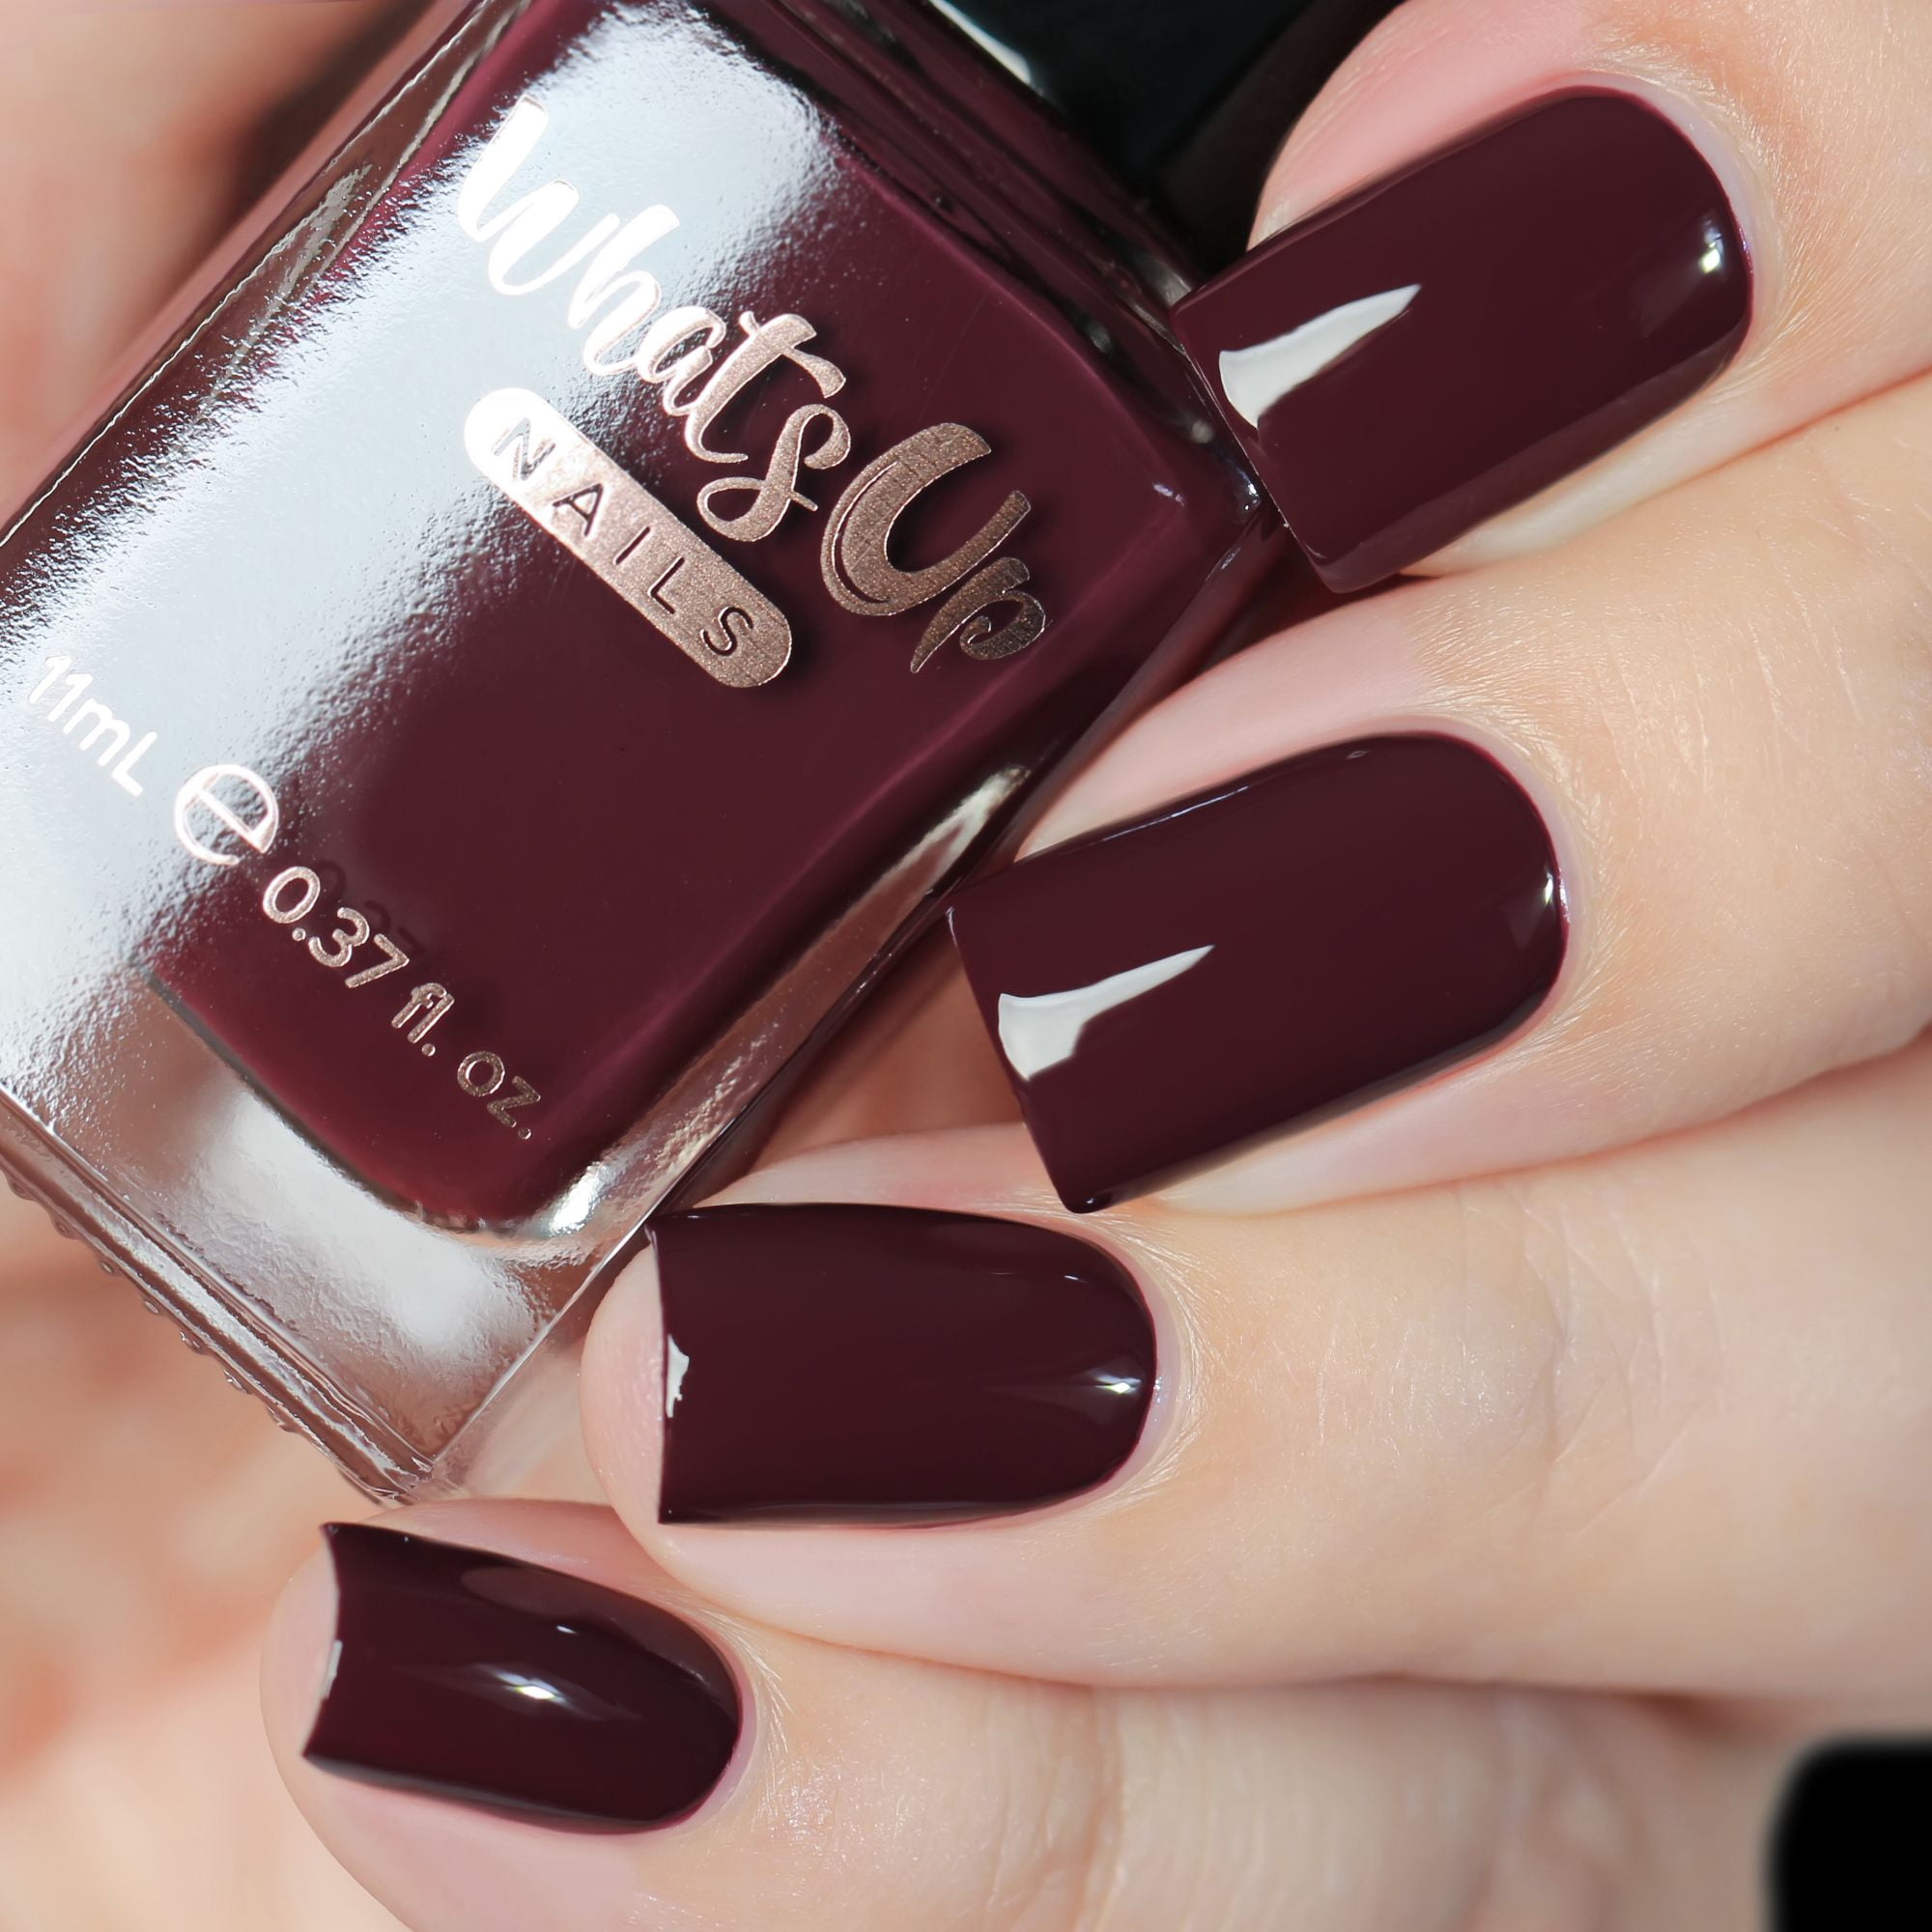 Amazon.com : Whats Up Nails - Tasting Trip Nail Polish Dark Burgundy Brown  Creme Lacquer Varnish Made in USA 12 Free Cruelty Free Vegan Clean : Beauty  & Personal Care